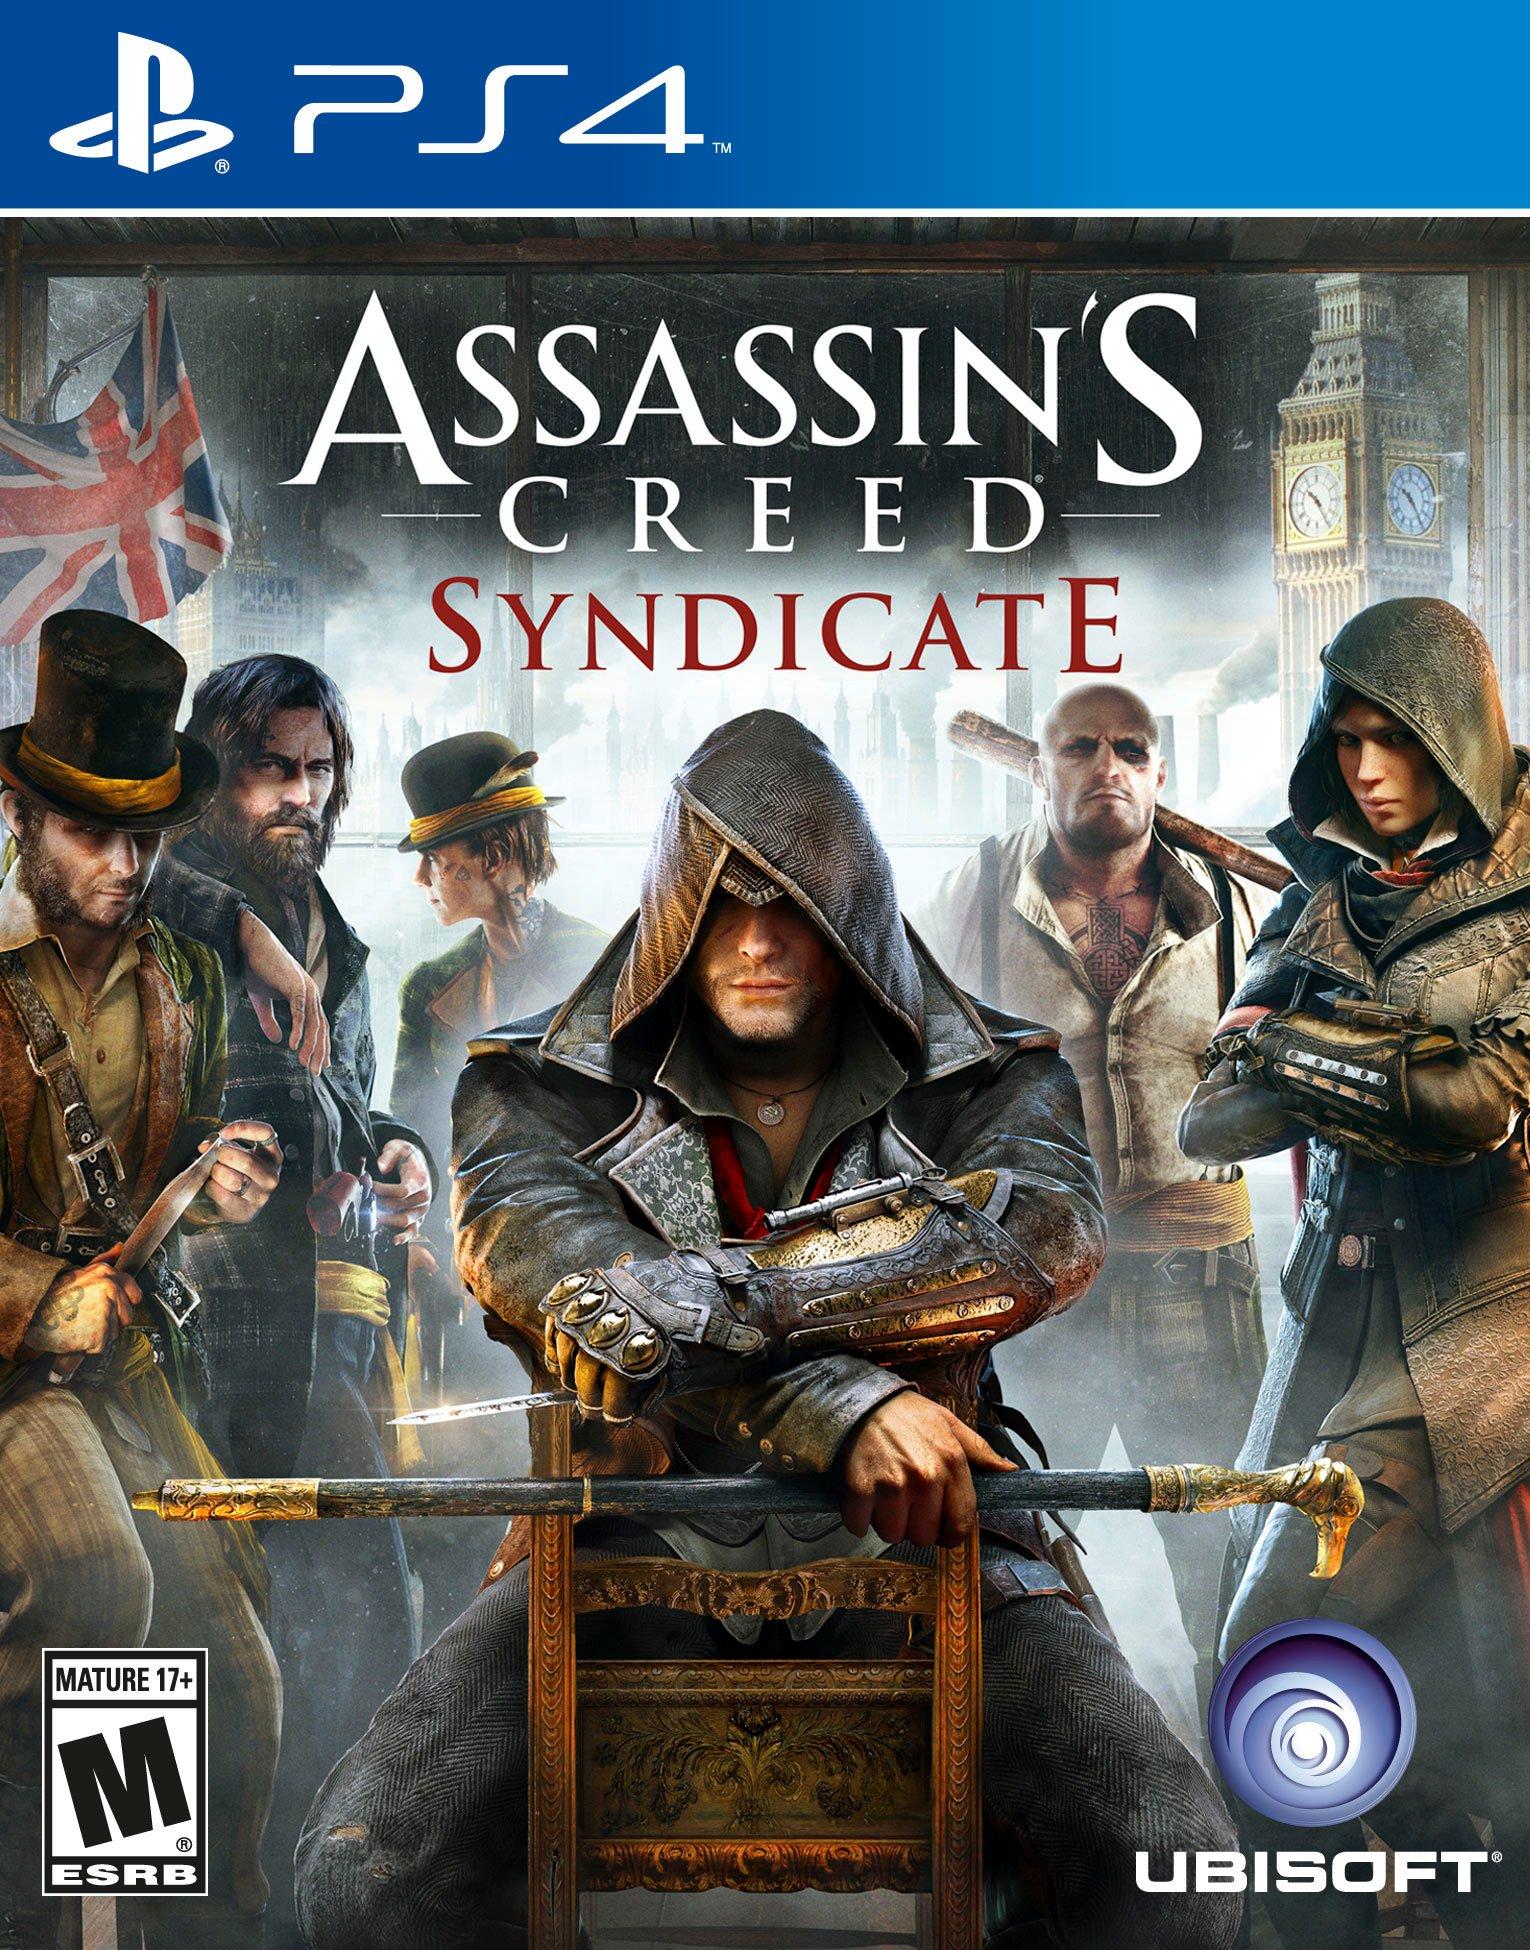 Assassin's Creed Syndicate - 4 | PlayStation 4 | GameStop